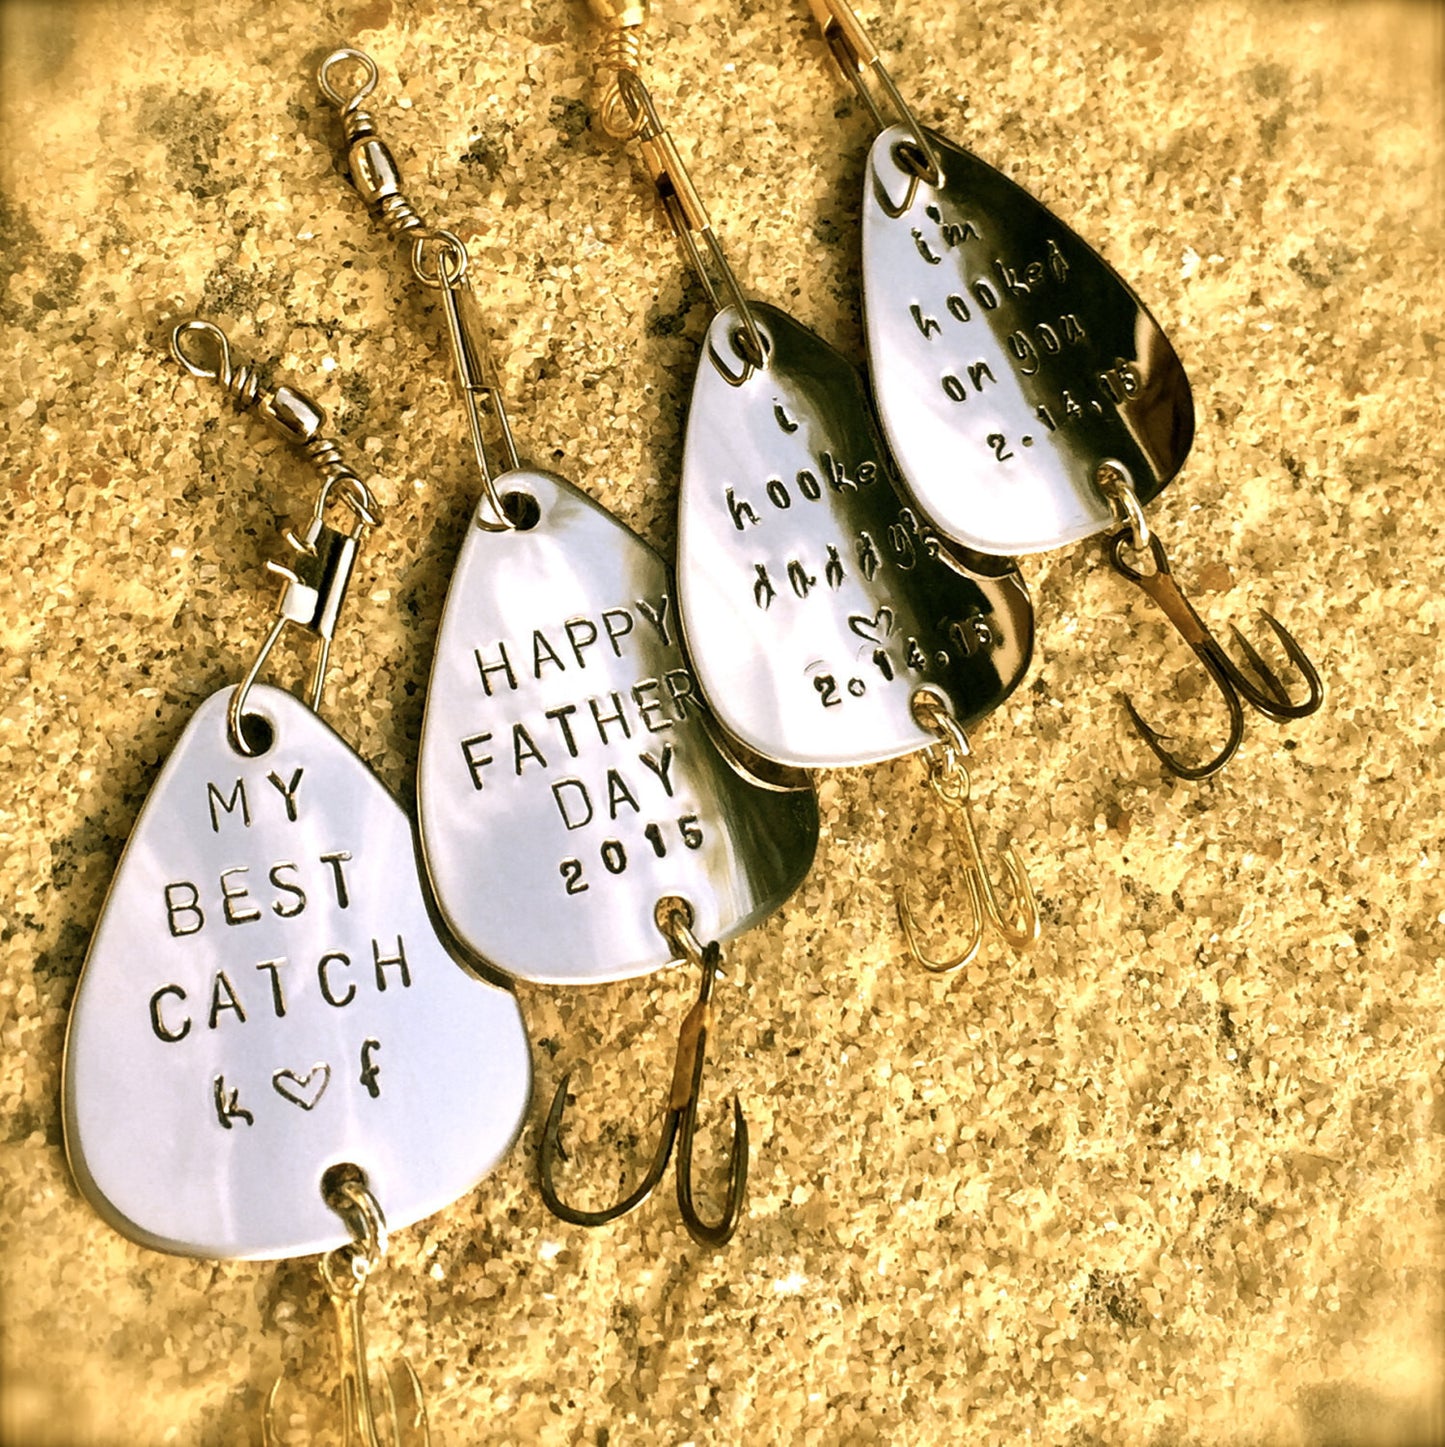 Fishing Lure, Custom Fishing Lure,Boyfriend Gift, Husband Gift, Personalized Fishing Lure, Hand Stamped Fishing Lure, natashaaloha - Natashaaloha, jewelry, bracelets, necklace, keychains, fishing lures, gifts for men, charms, personalized, 